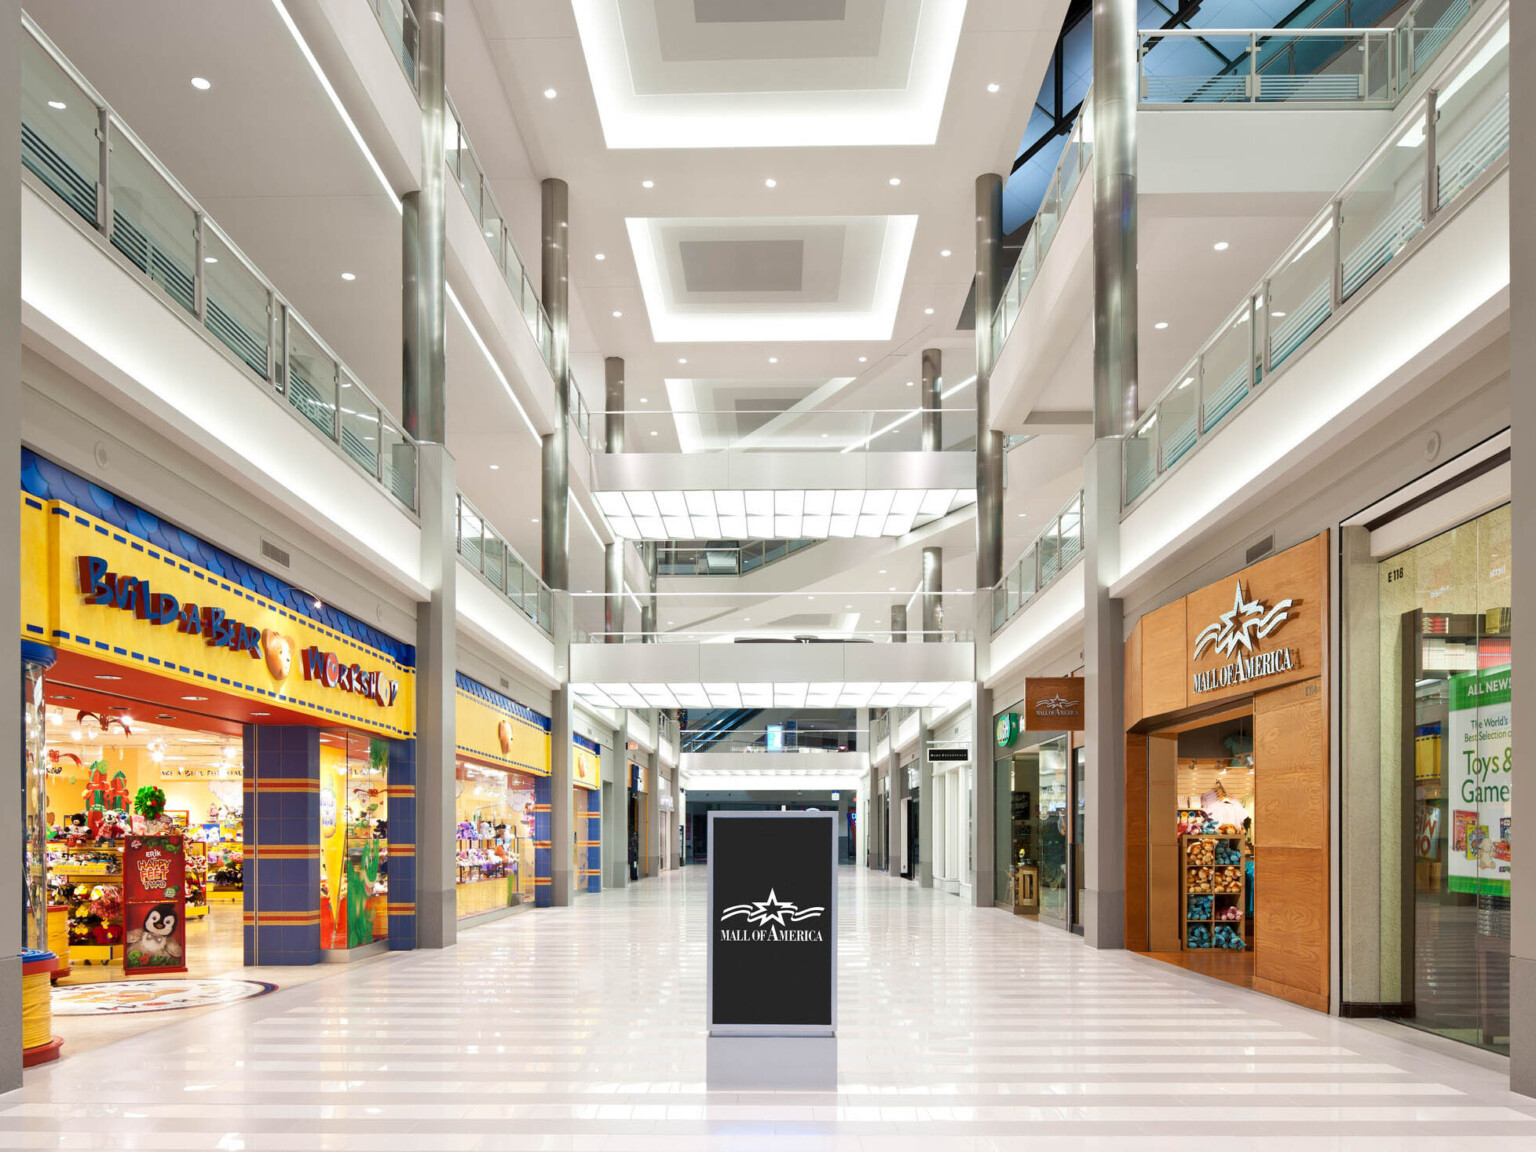 Multilevel mall atrium surrounded by stores with white boxed lighting on the ceiling